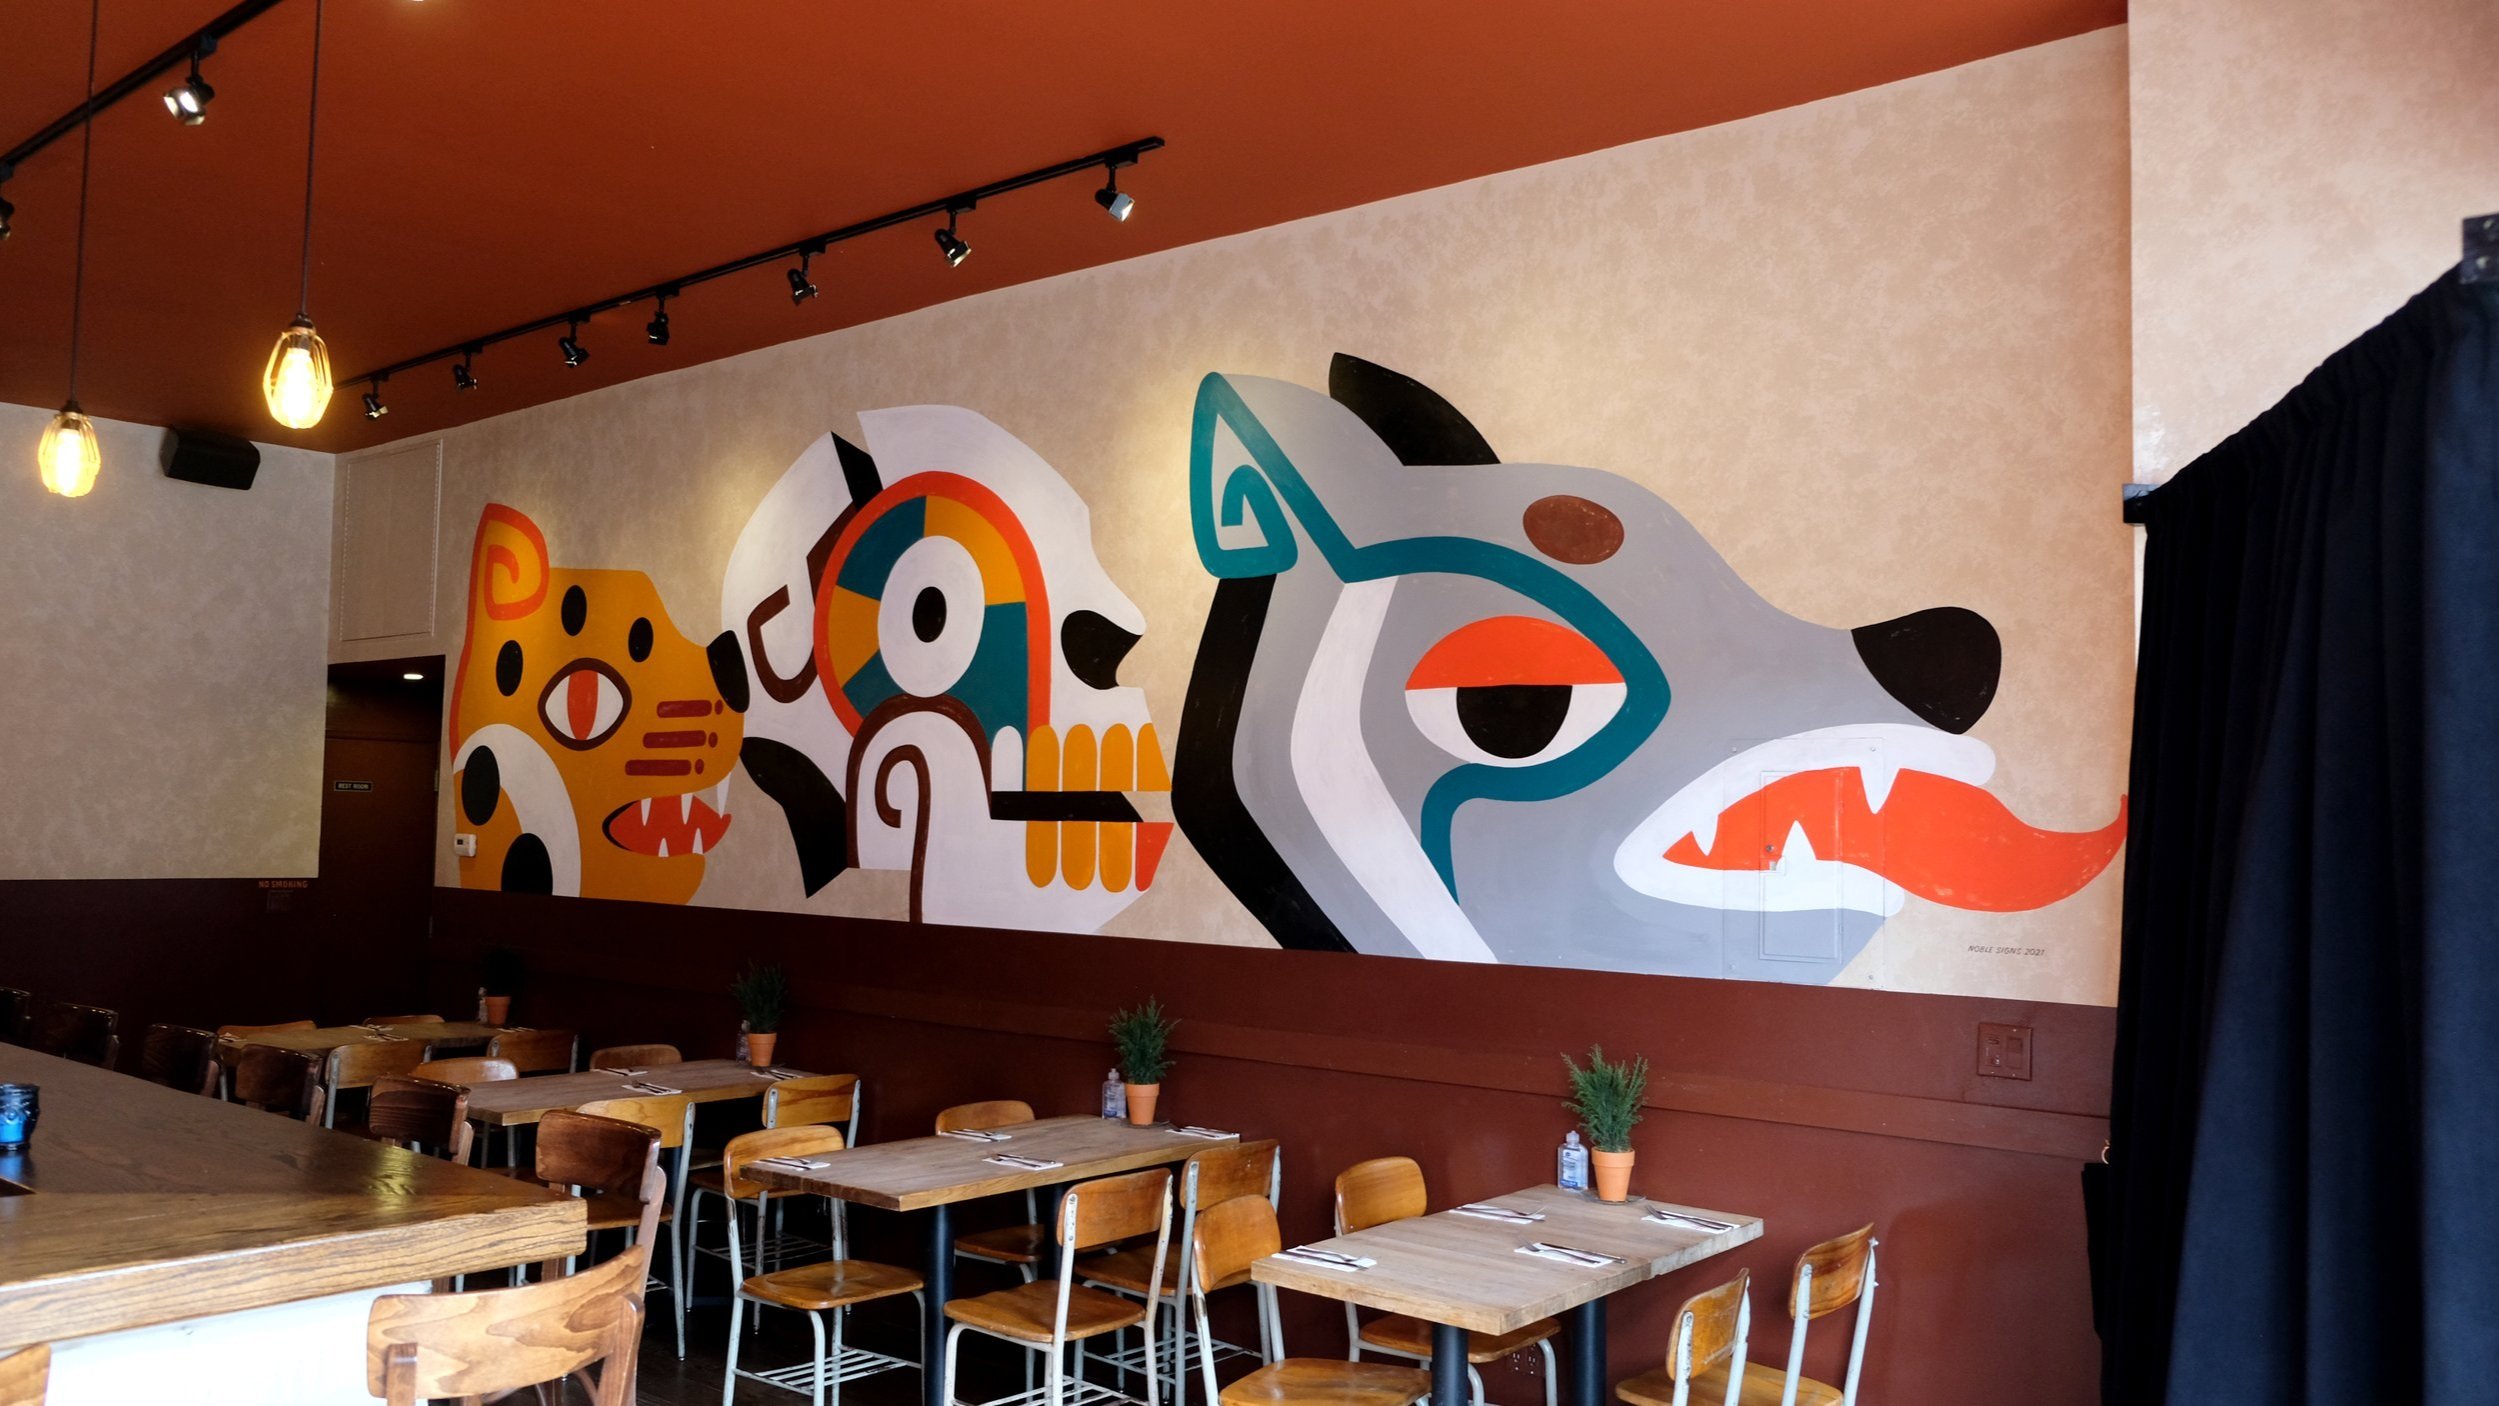  A handpainted interior mural of a jaguar, a skull, and a wild dog emulating ancient Aztec calendar art in yellow, white, gray, teal, black, and orange paint 